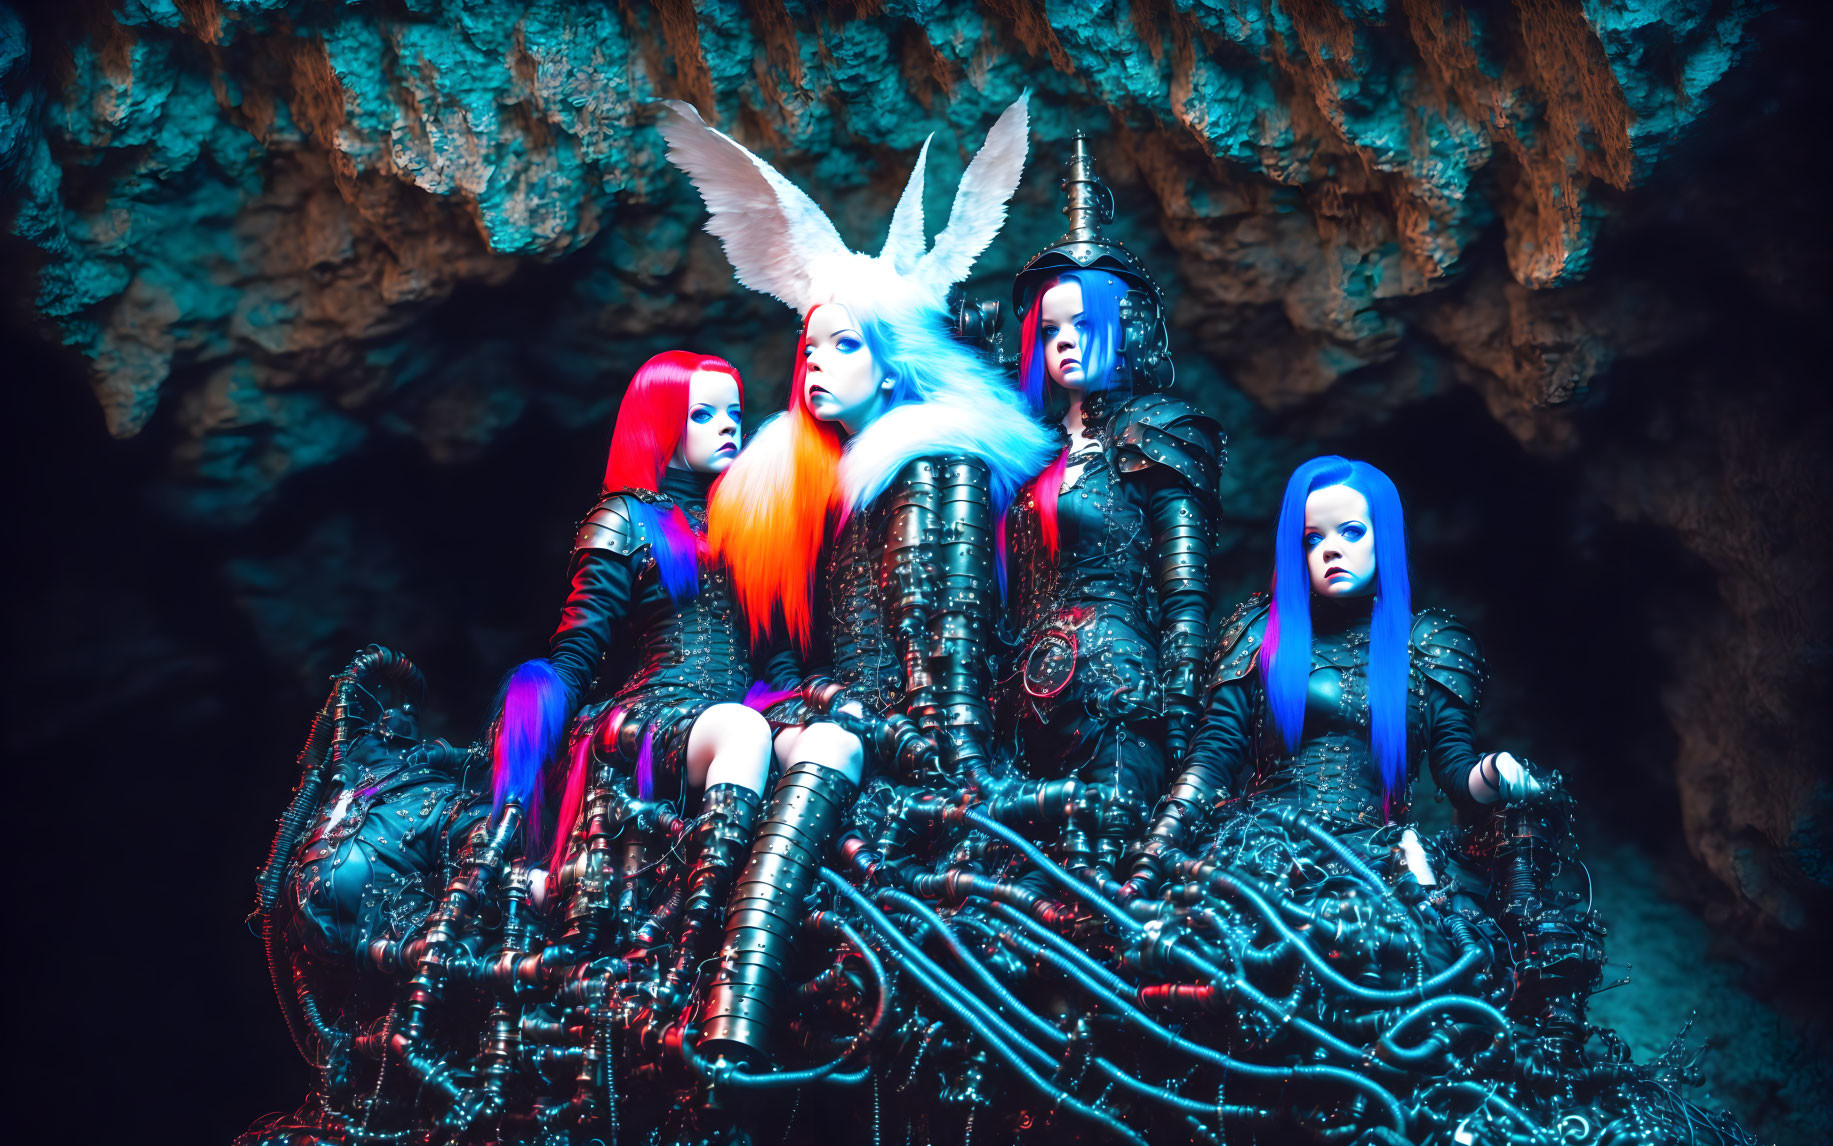 Futuristic costumes with bright hair, cybernetic elements, and mechanical rabbit head in dark cave